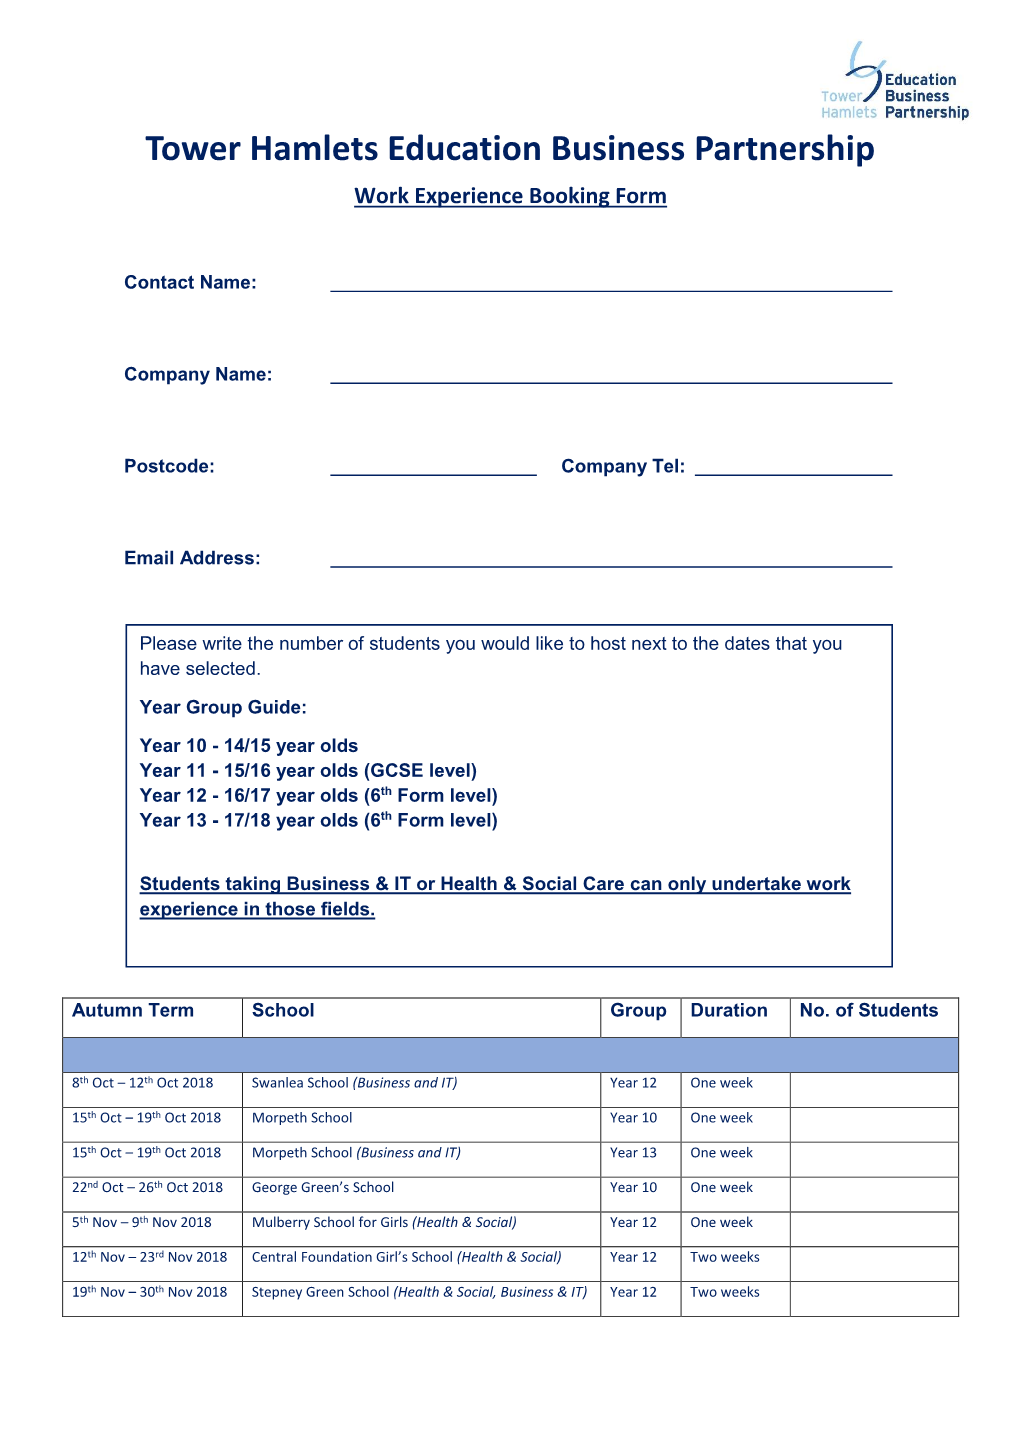 Tower Hamlets Education Business Partnership Work Experience Booking Form